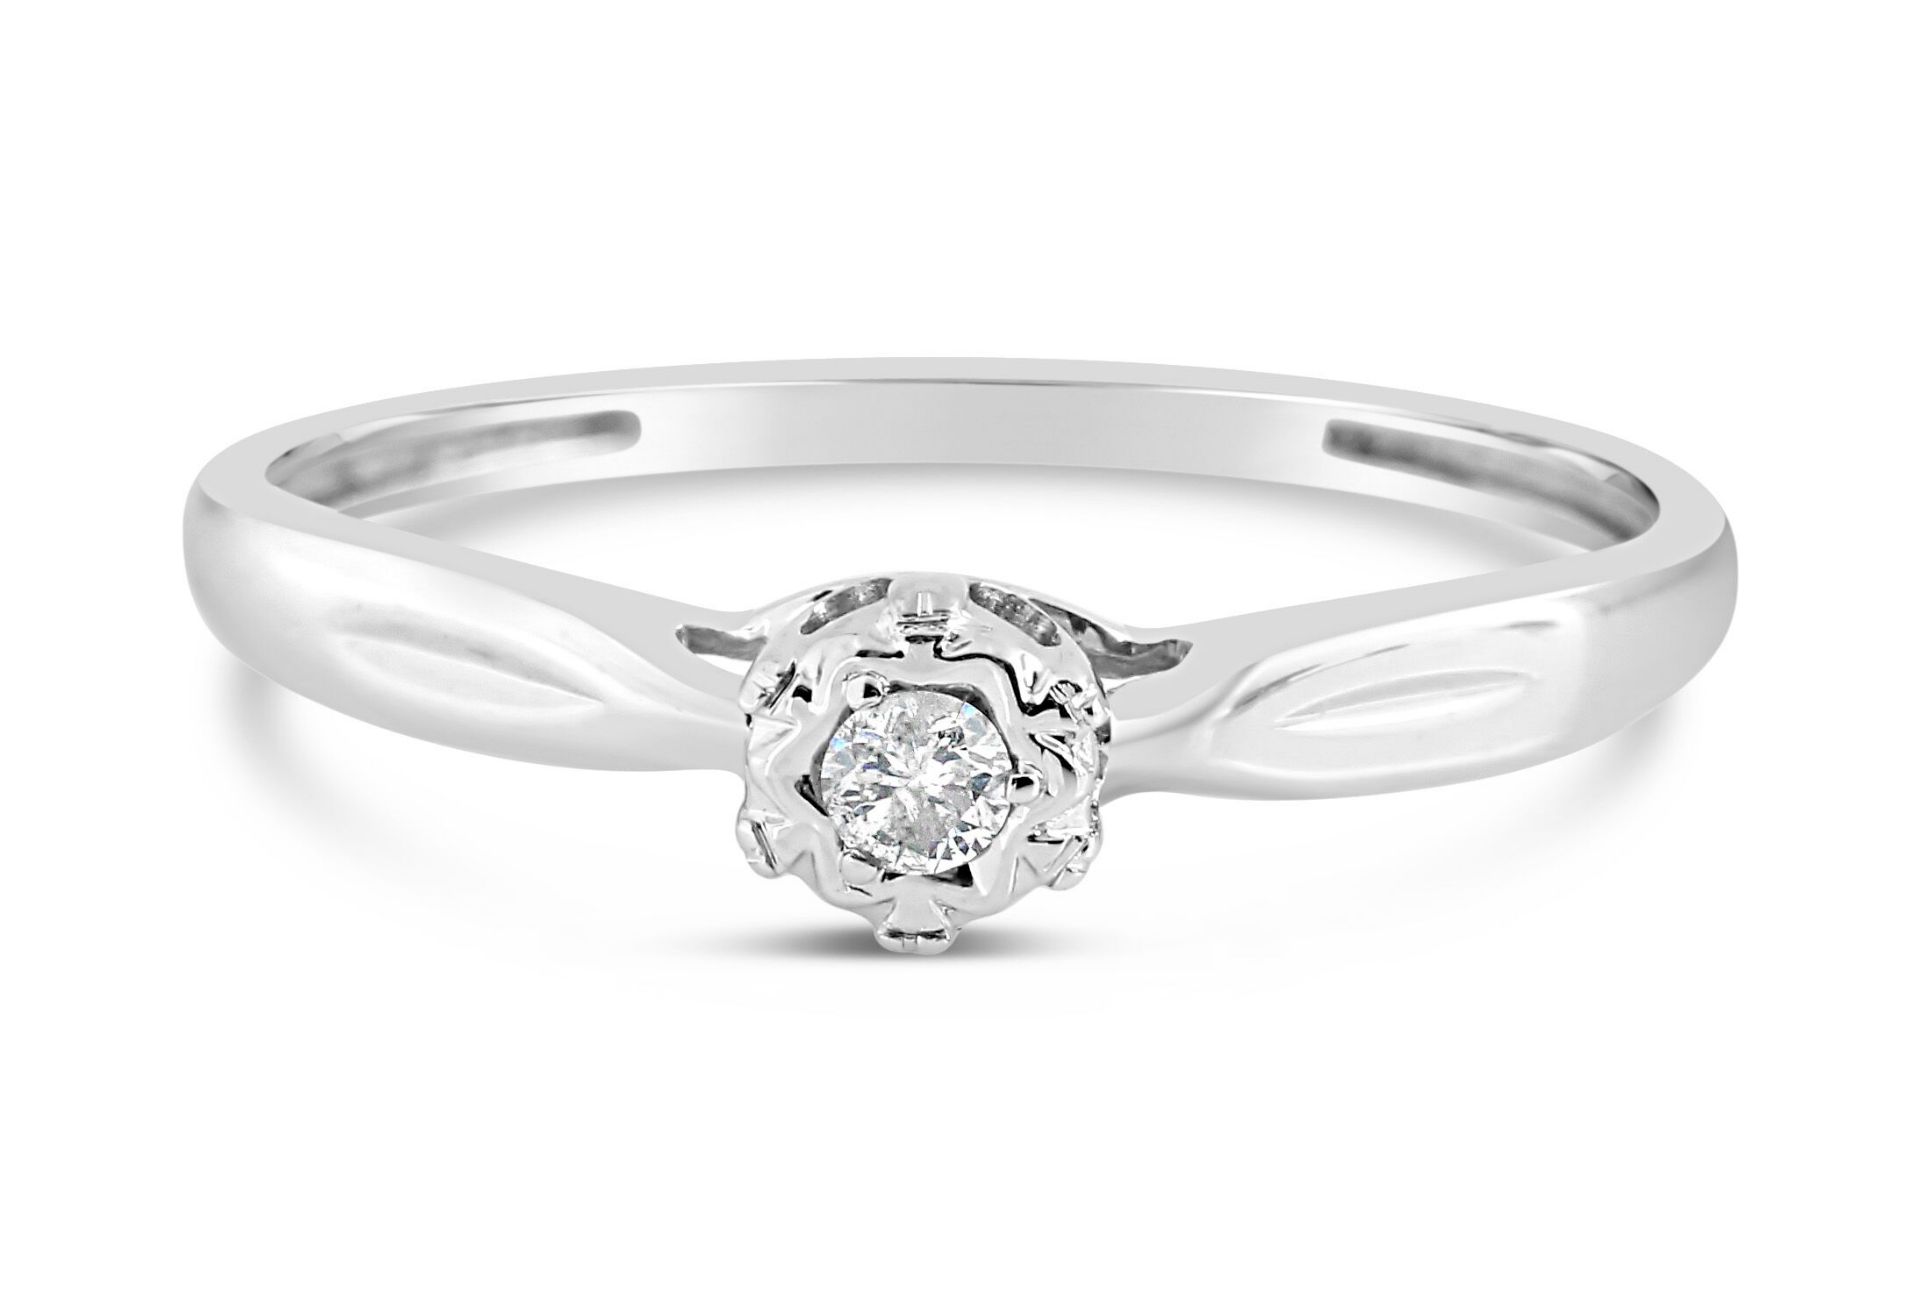 White Gold Diamond Solitaire, Metal 9ct White Gold, Weight (g) 1.2, Diamond Weight (ct) 1.6, Size Q,